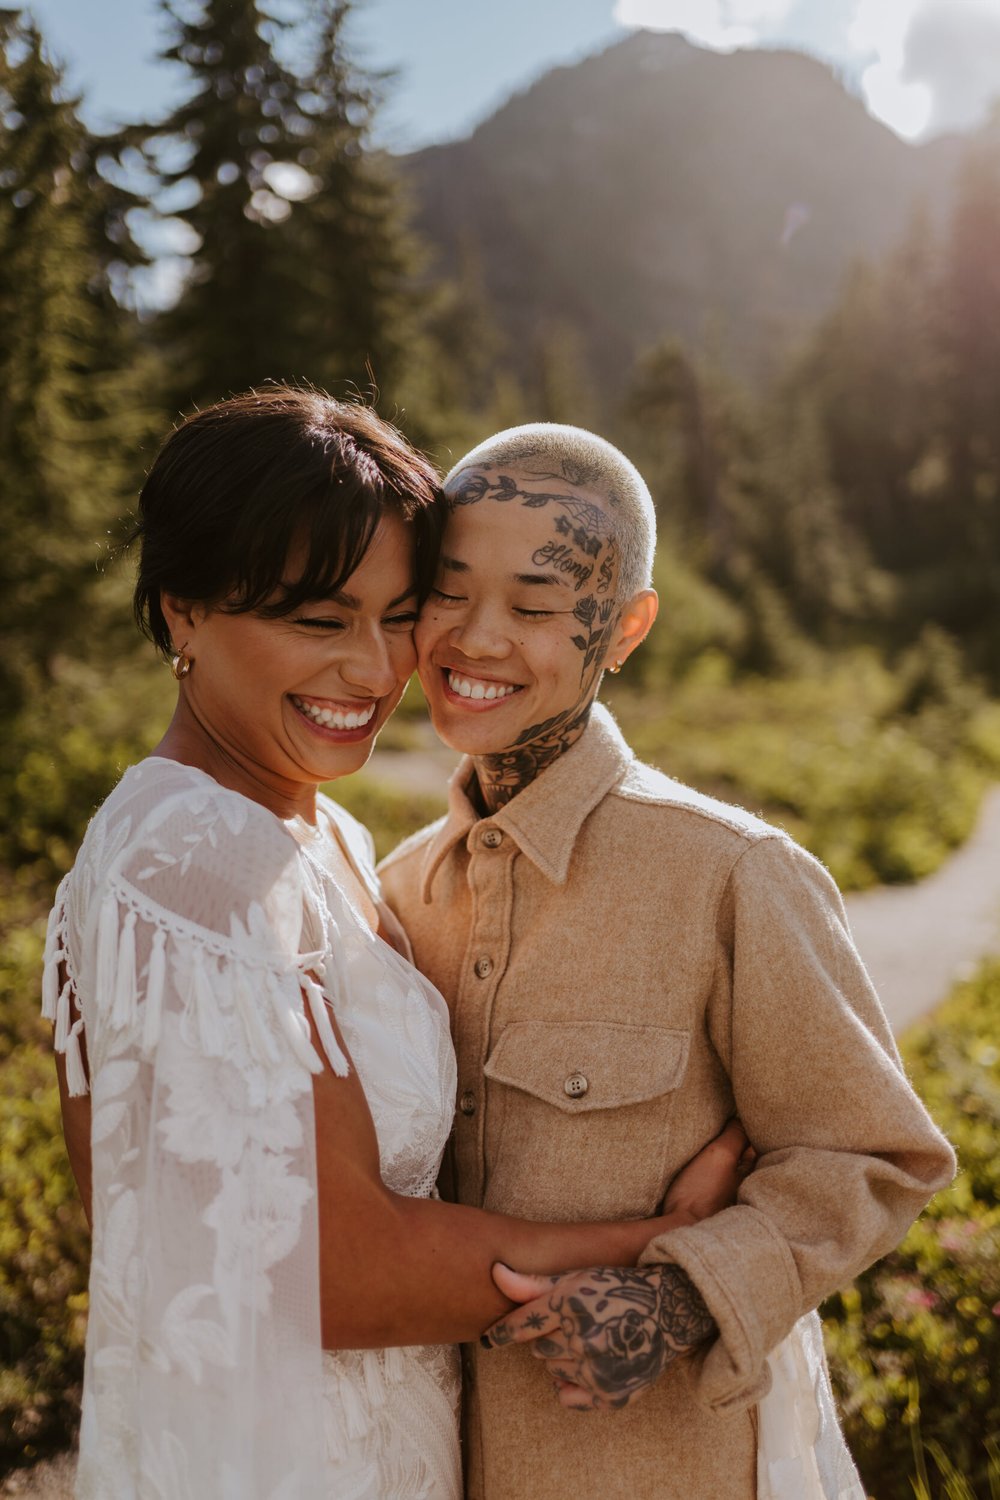 North Cascades National Park Elopement at Picture Lake, edgy lesbian couple with tattoos, two brides, candid vibrant happy wedding photos, Photography by Tida Svy | www.tidasvy.com